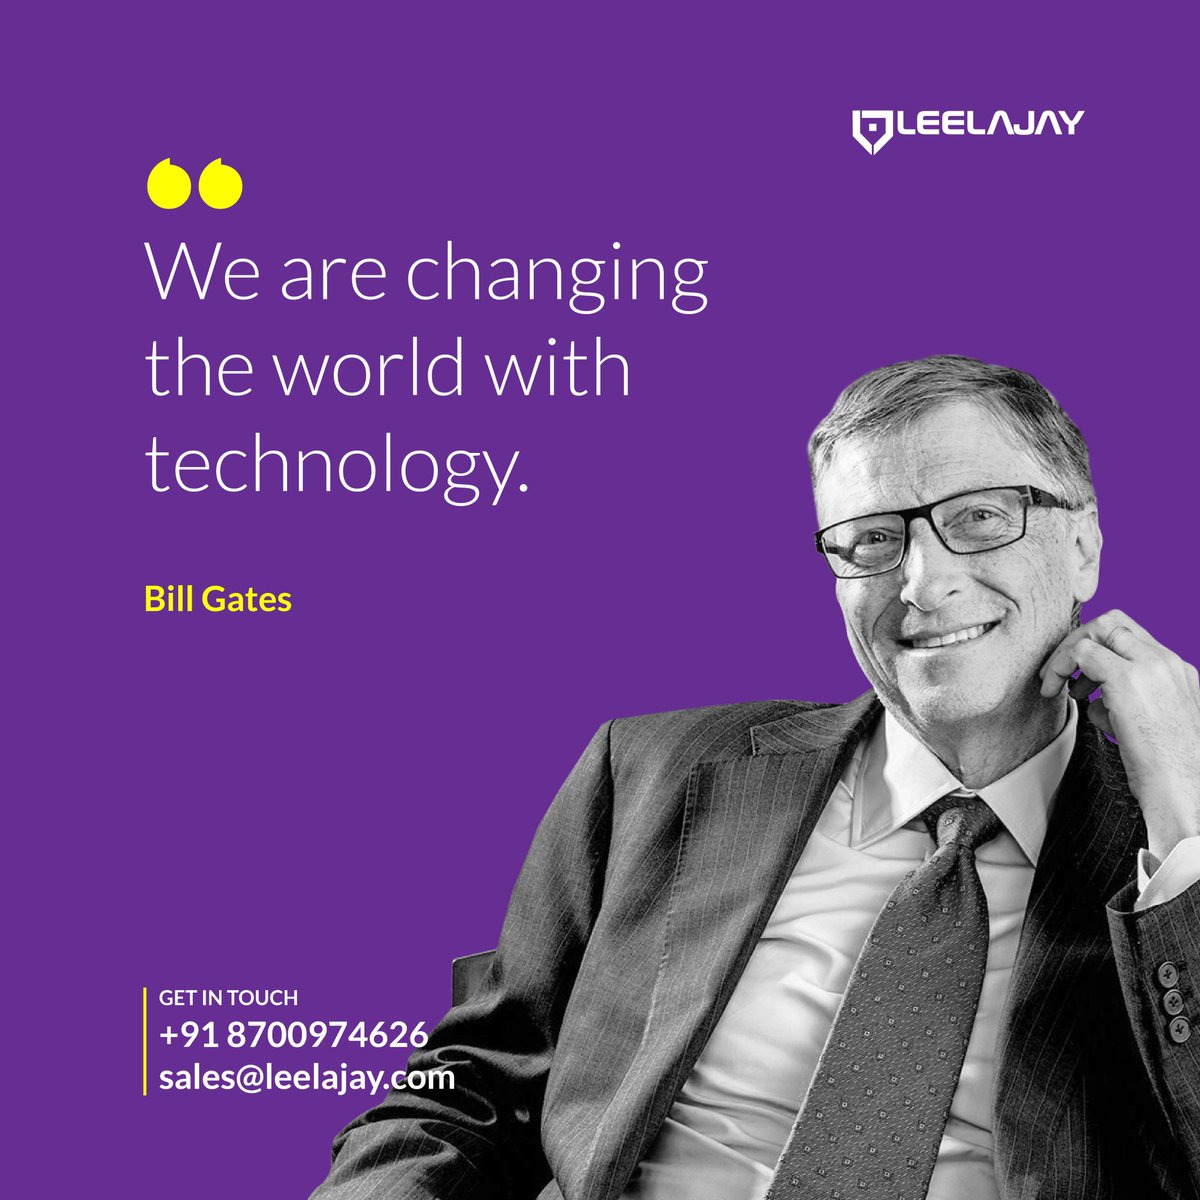 Wednesday is the hump day! You're halfway through the week, so let's channel our inner Bill Gates and realize how we can bring a tangible difference to the people around us!
#humpdaywednesday #humpdaymotivation #WednesdayWisdom
#wednesdaymotivation #leelajaytechnologies